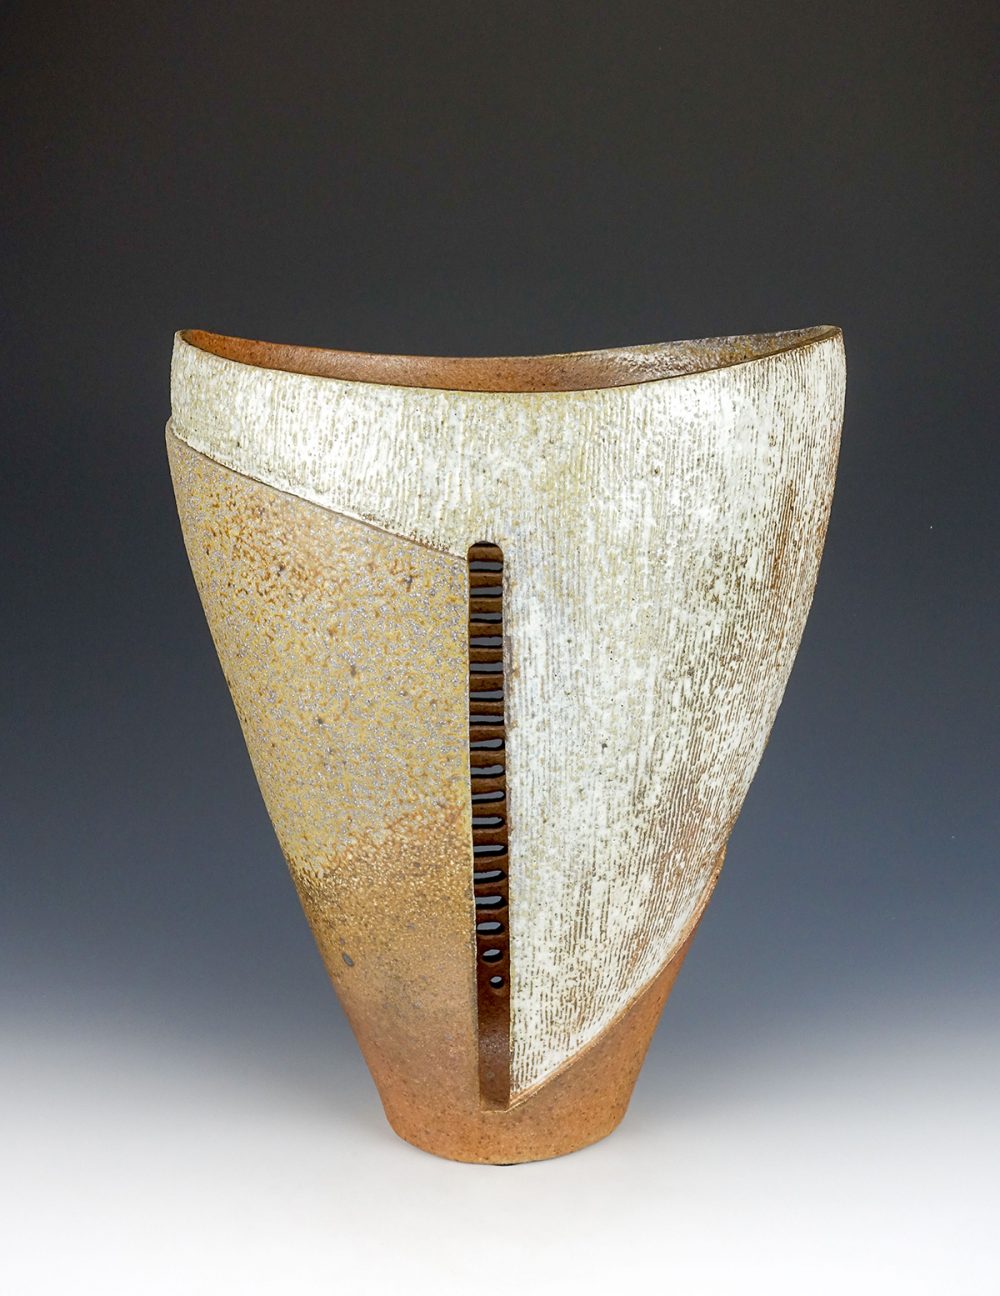 A ceramic vessel sits on a white surface, in front of a grey background. The vessel is a V-shape, with a narrow rounded bottom, and sides that rise steeply as they go up. The opening at the top arcs down in the middle. At the center of the piece is a vertical opening that reveals a series of horizontal openings in the wall of the form. The design features a striated white area on the right that moves across to the left at the top of the piece. The rest of the left side is a mottled beige and ochre color and the bottom is a rusty orange.